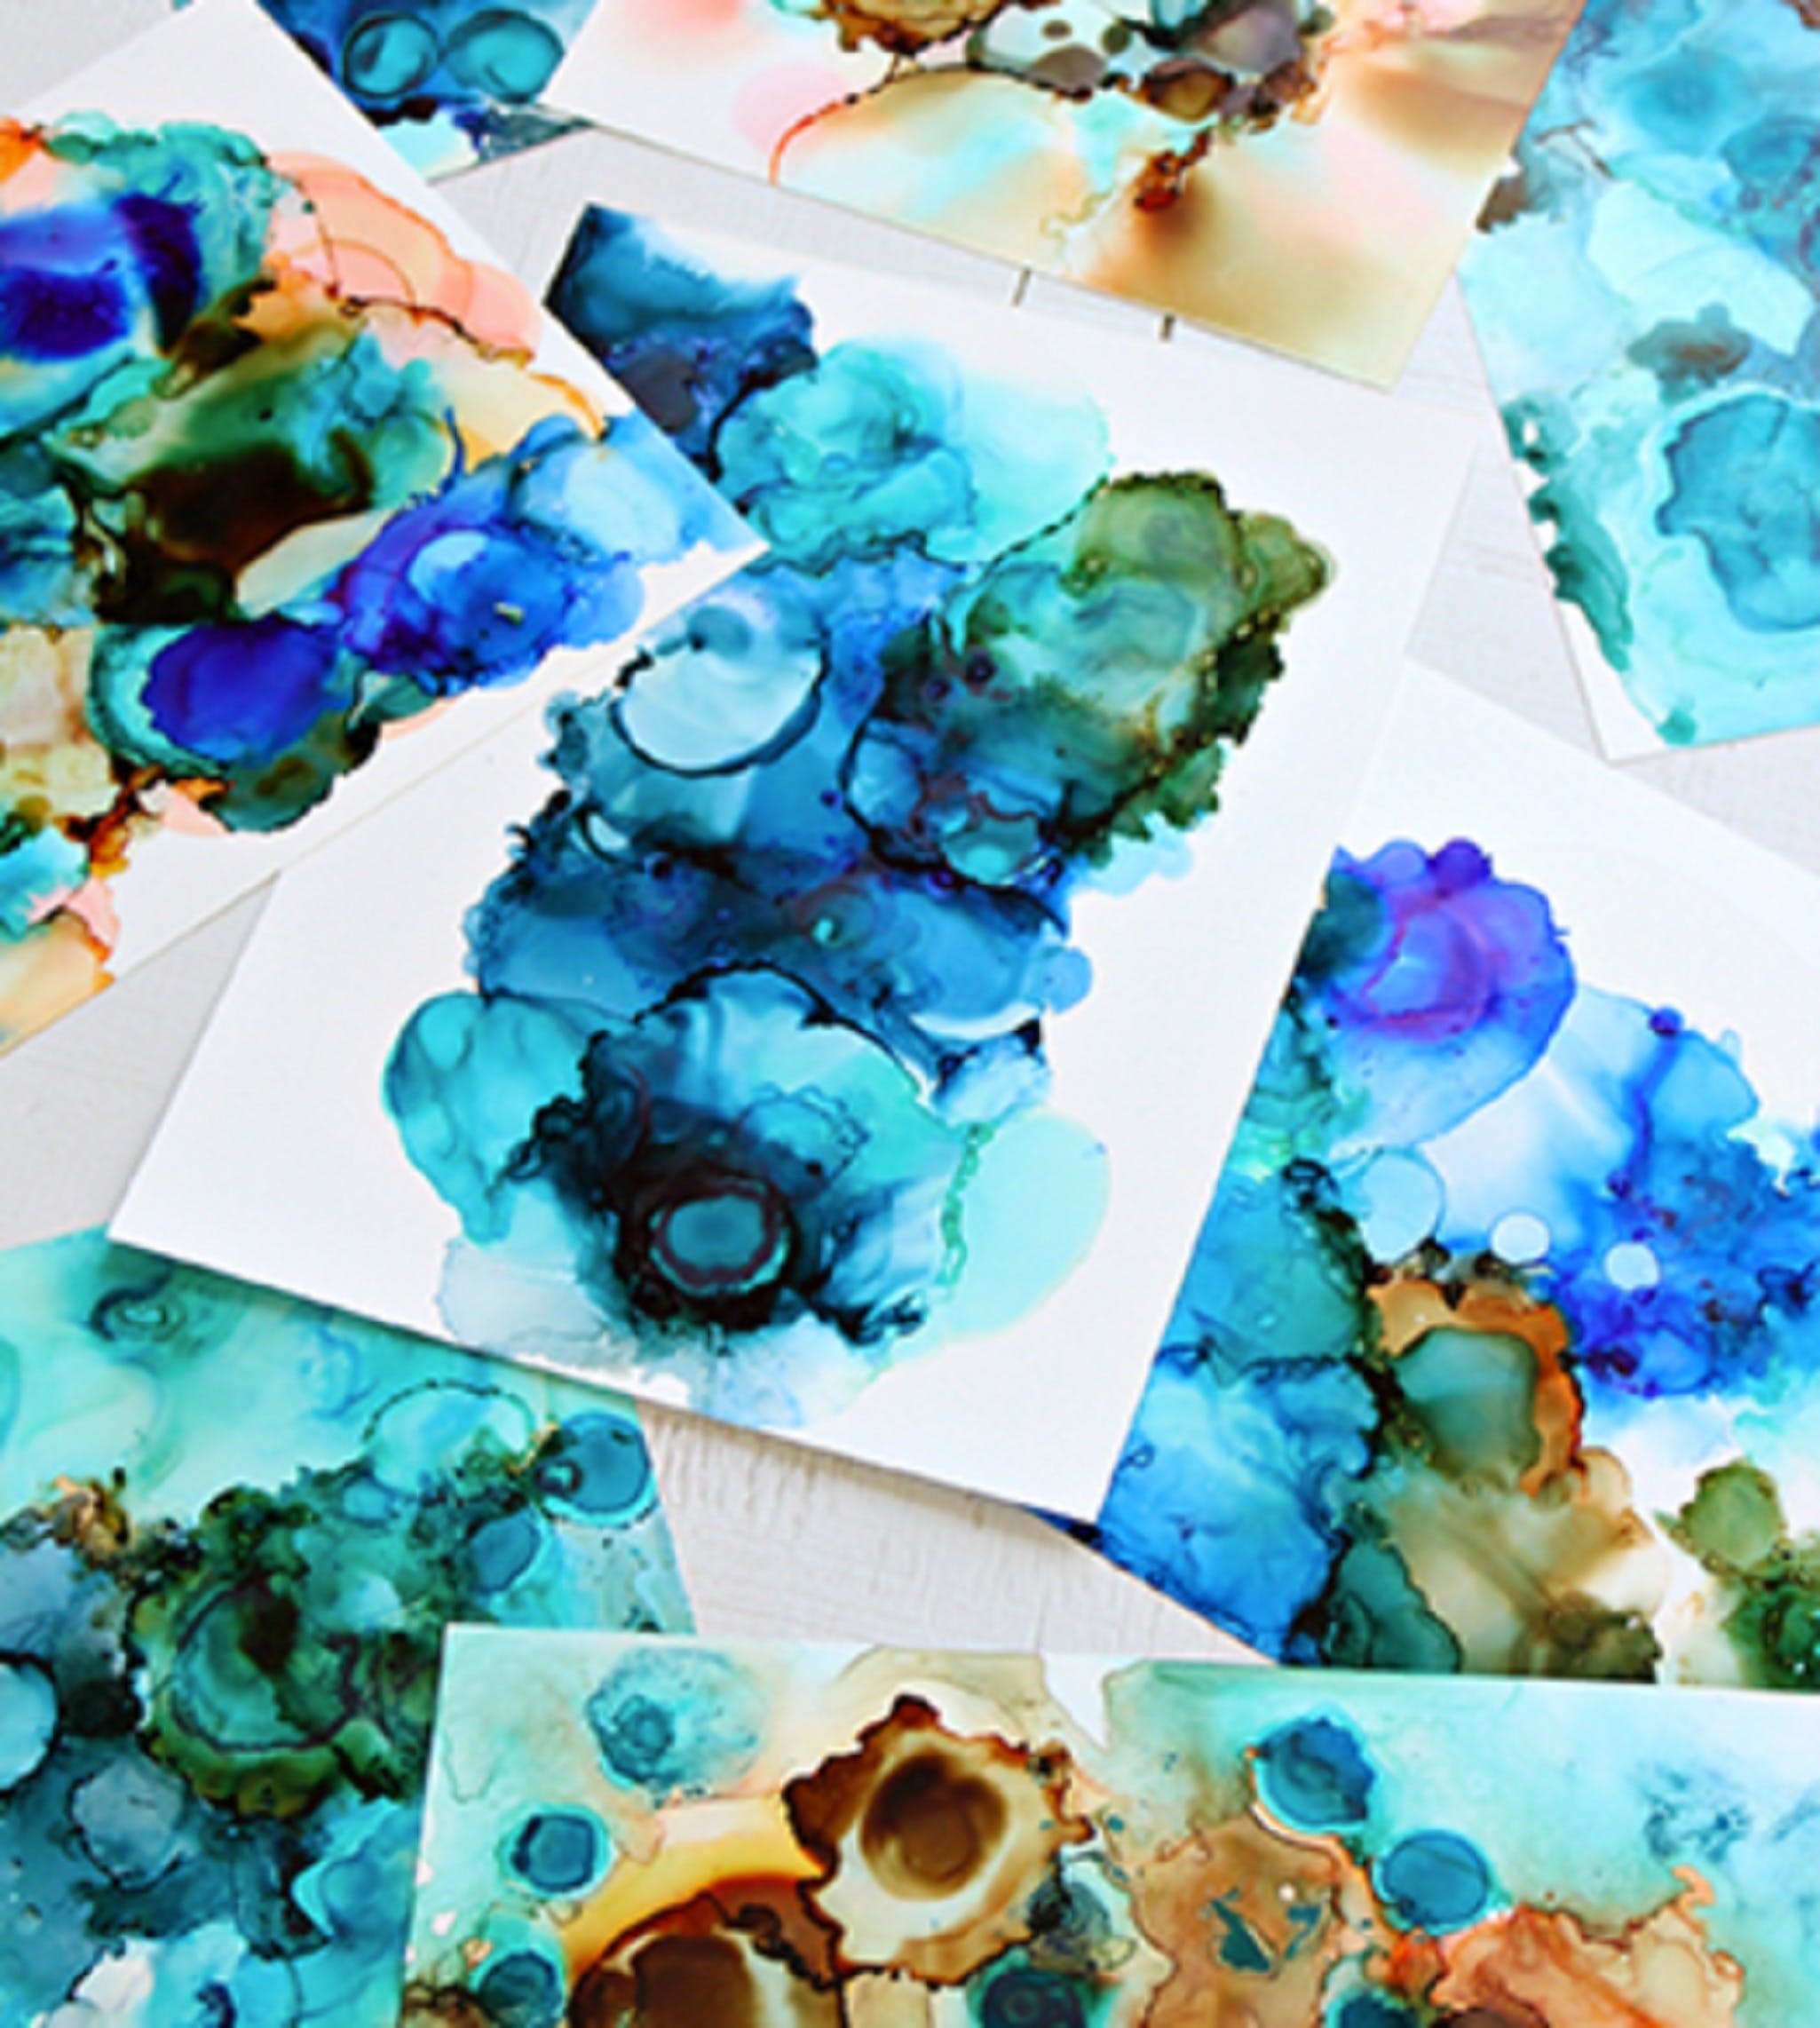 Alcohol Ink Art Class - eAccommodation